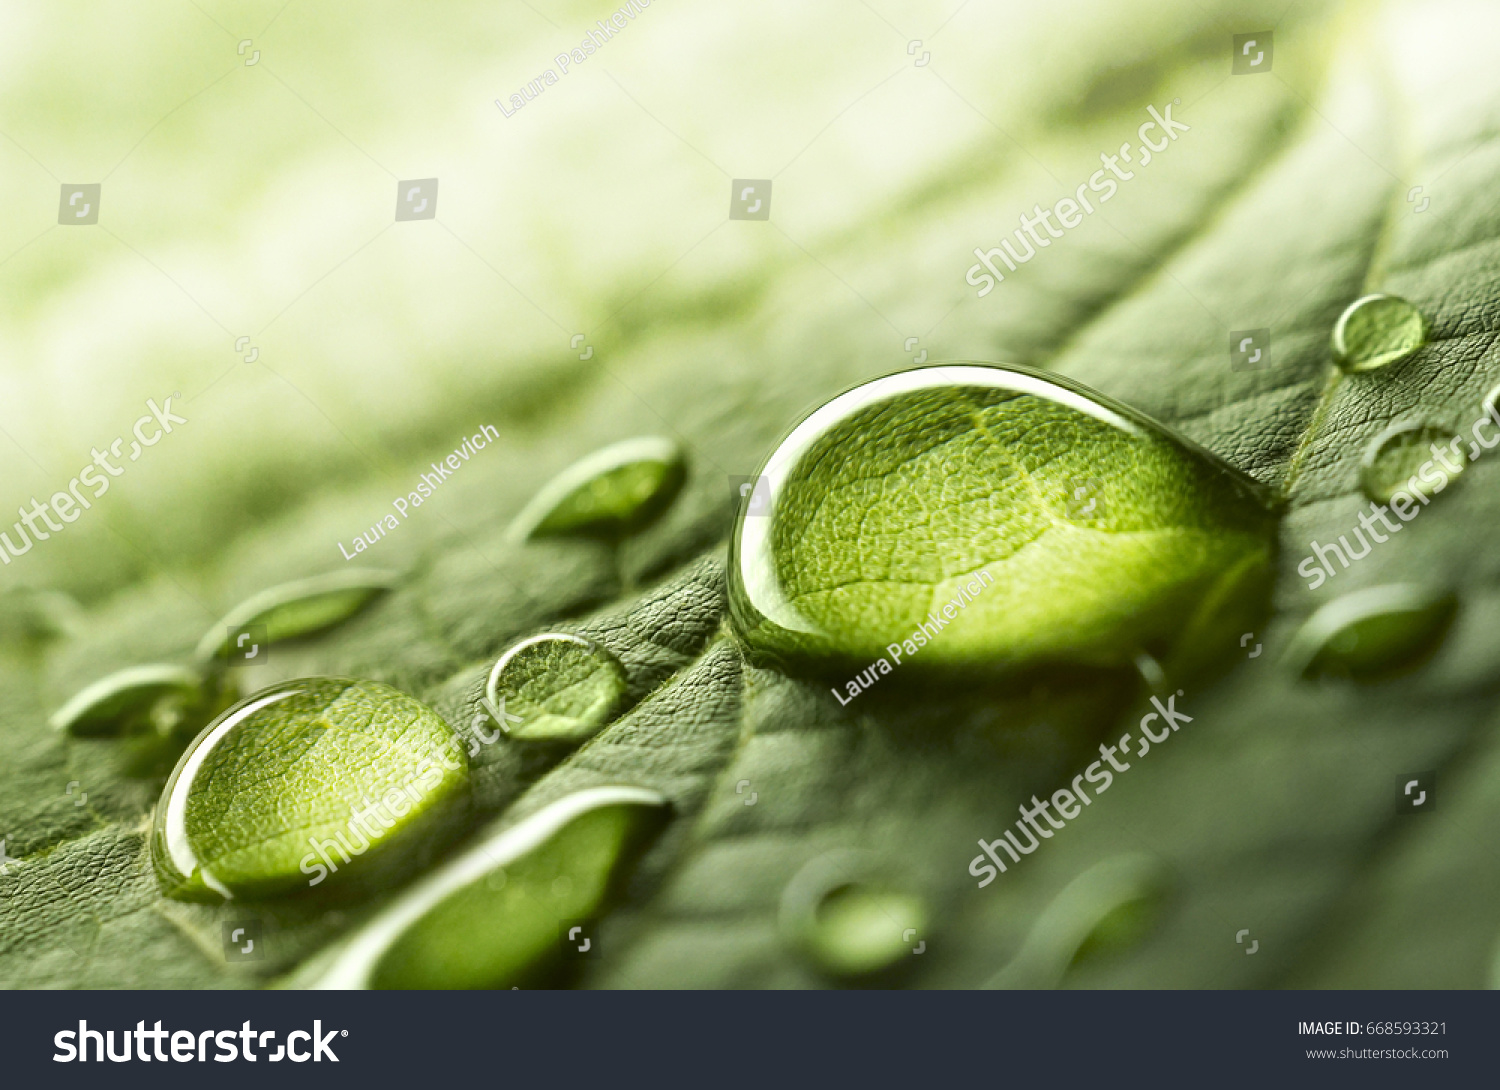 Large beautiful drops of transparent rain water on a green leaf macro. Drops of dew in the morning glow in the sun. Beautiful leaf texture in nature. Natural background #668593321